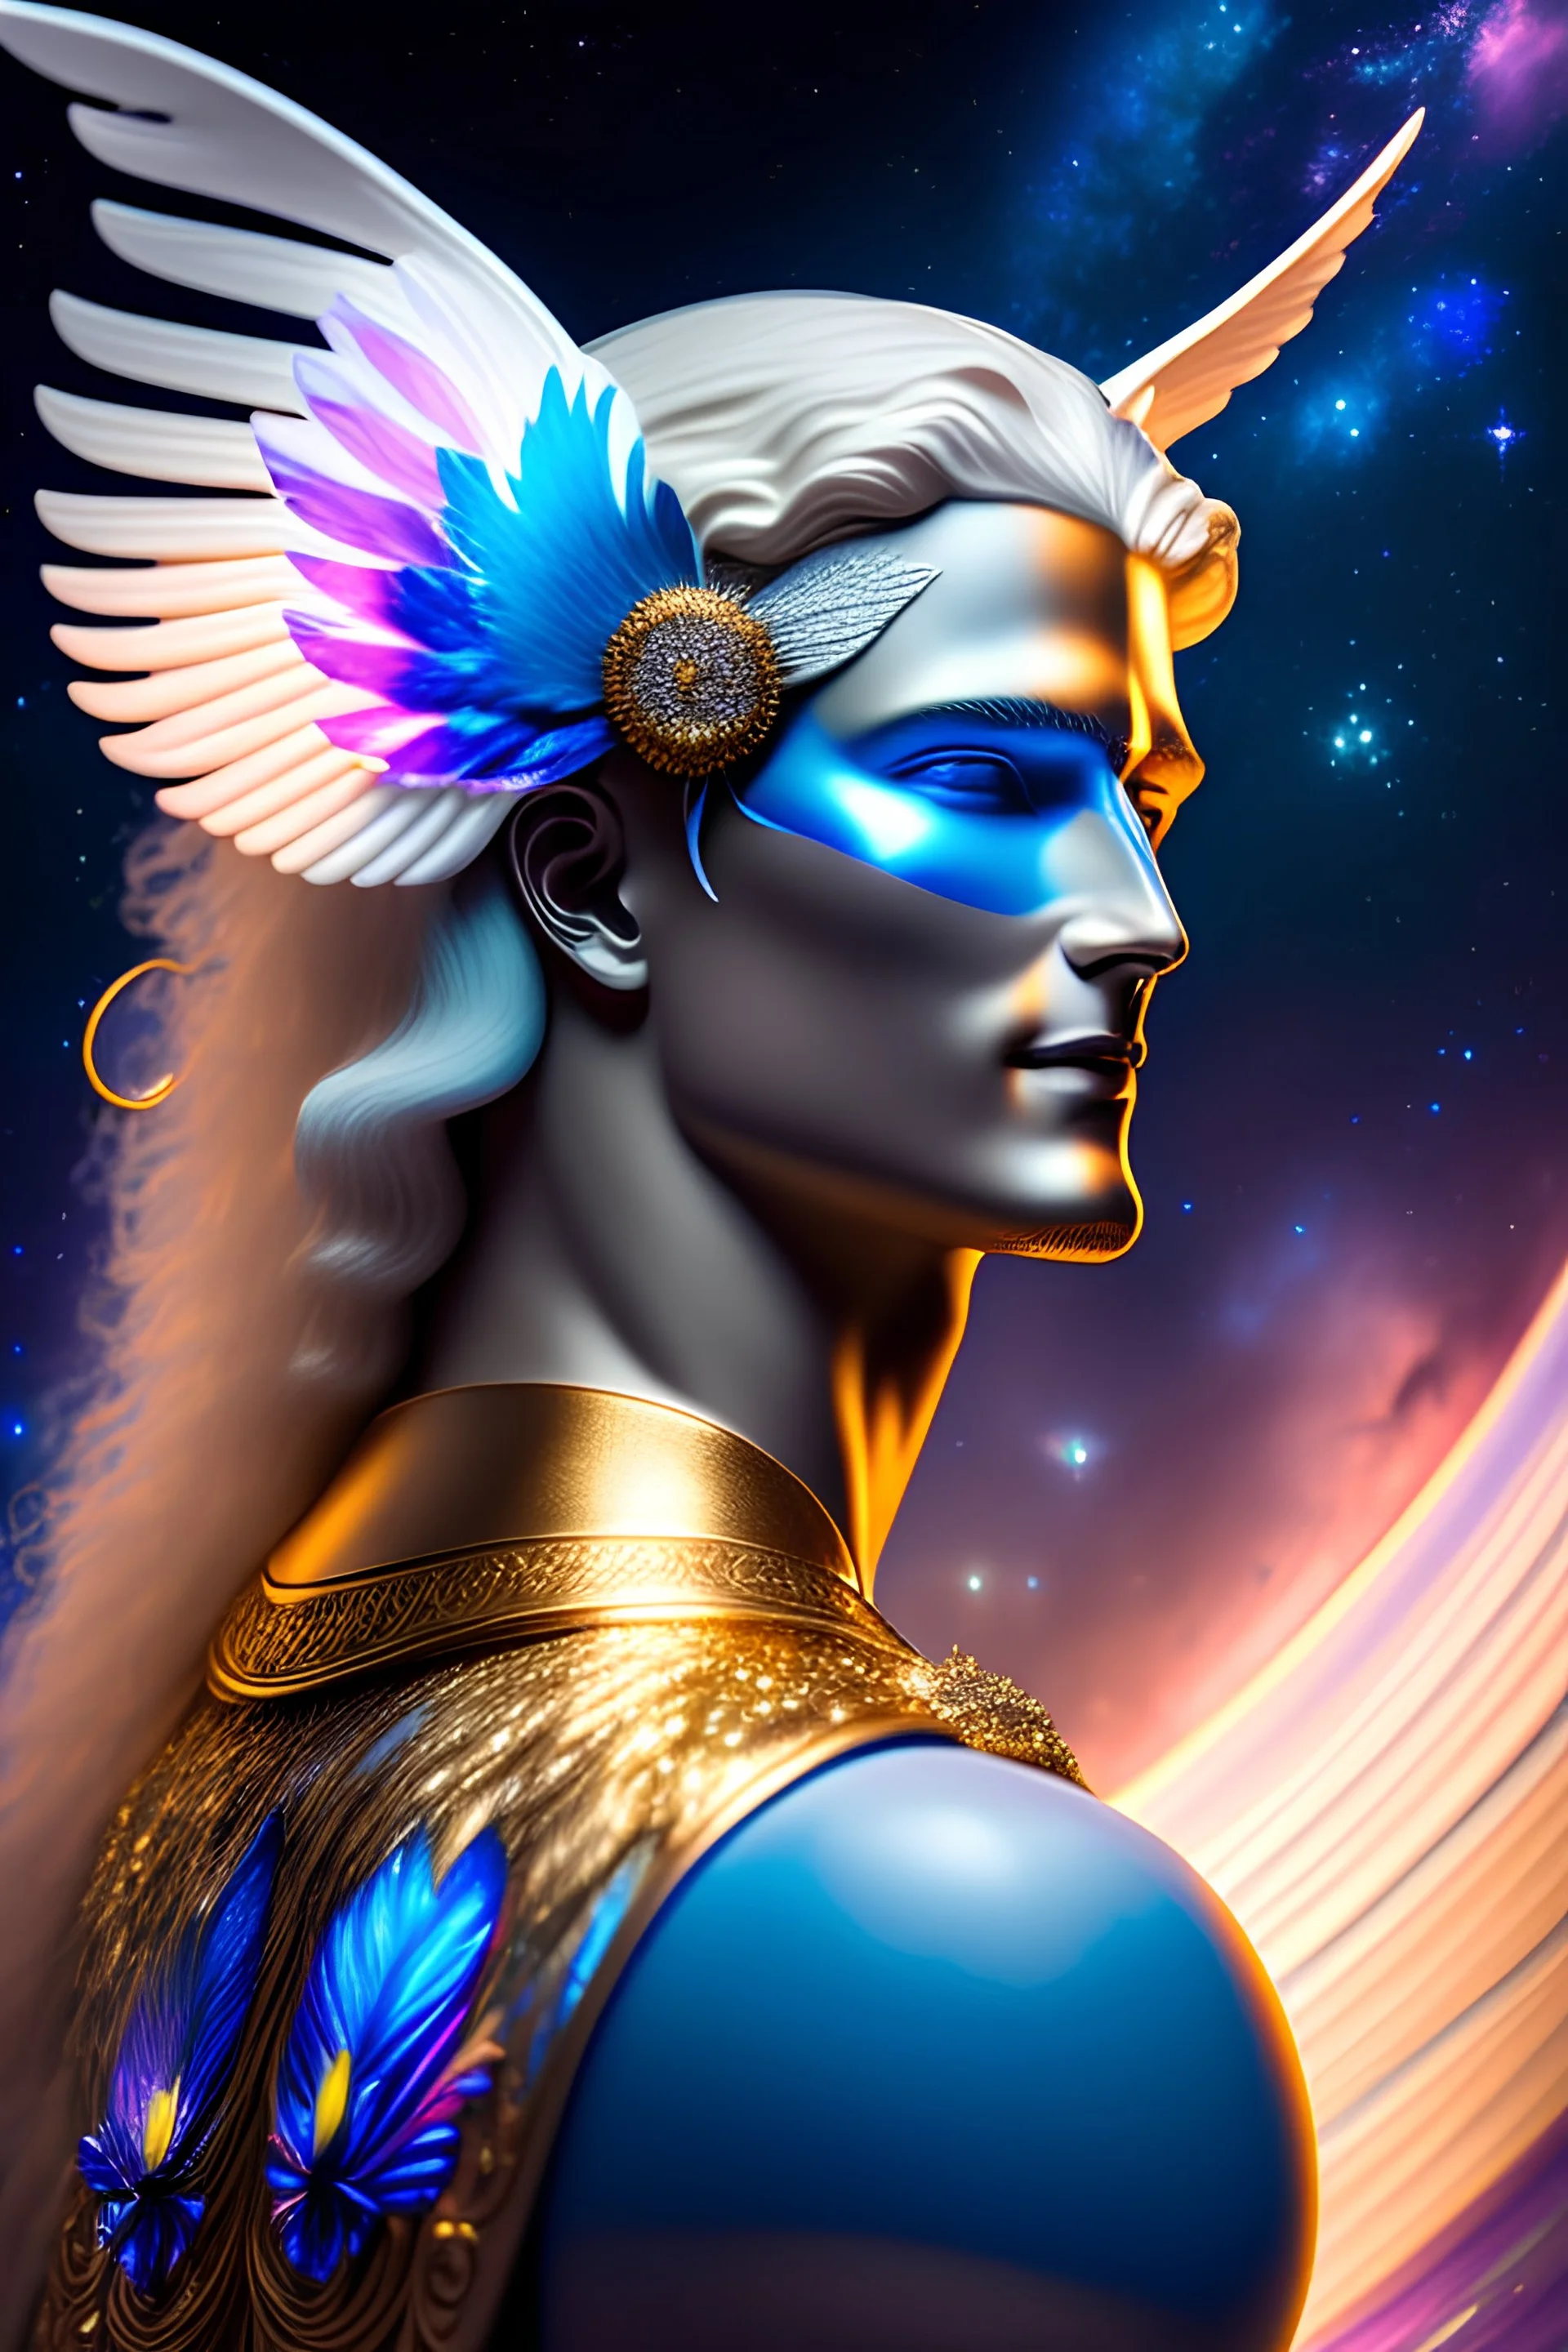 Flower, angel man, (detailed face )++, (detailed blue eyes)++ (long blond hair)++(pectoro visible)++(smile)++, , (two feathered wings on his shoulder blades)++, beautiful place, incredible, cosmic, colours, planet, gold, realistic, real photo, stars at night, detailed, high contrast, 8k high definition, unreal engine 5, extremely sharp details, (lighting effect, light background)++.